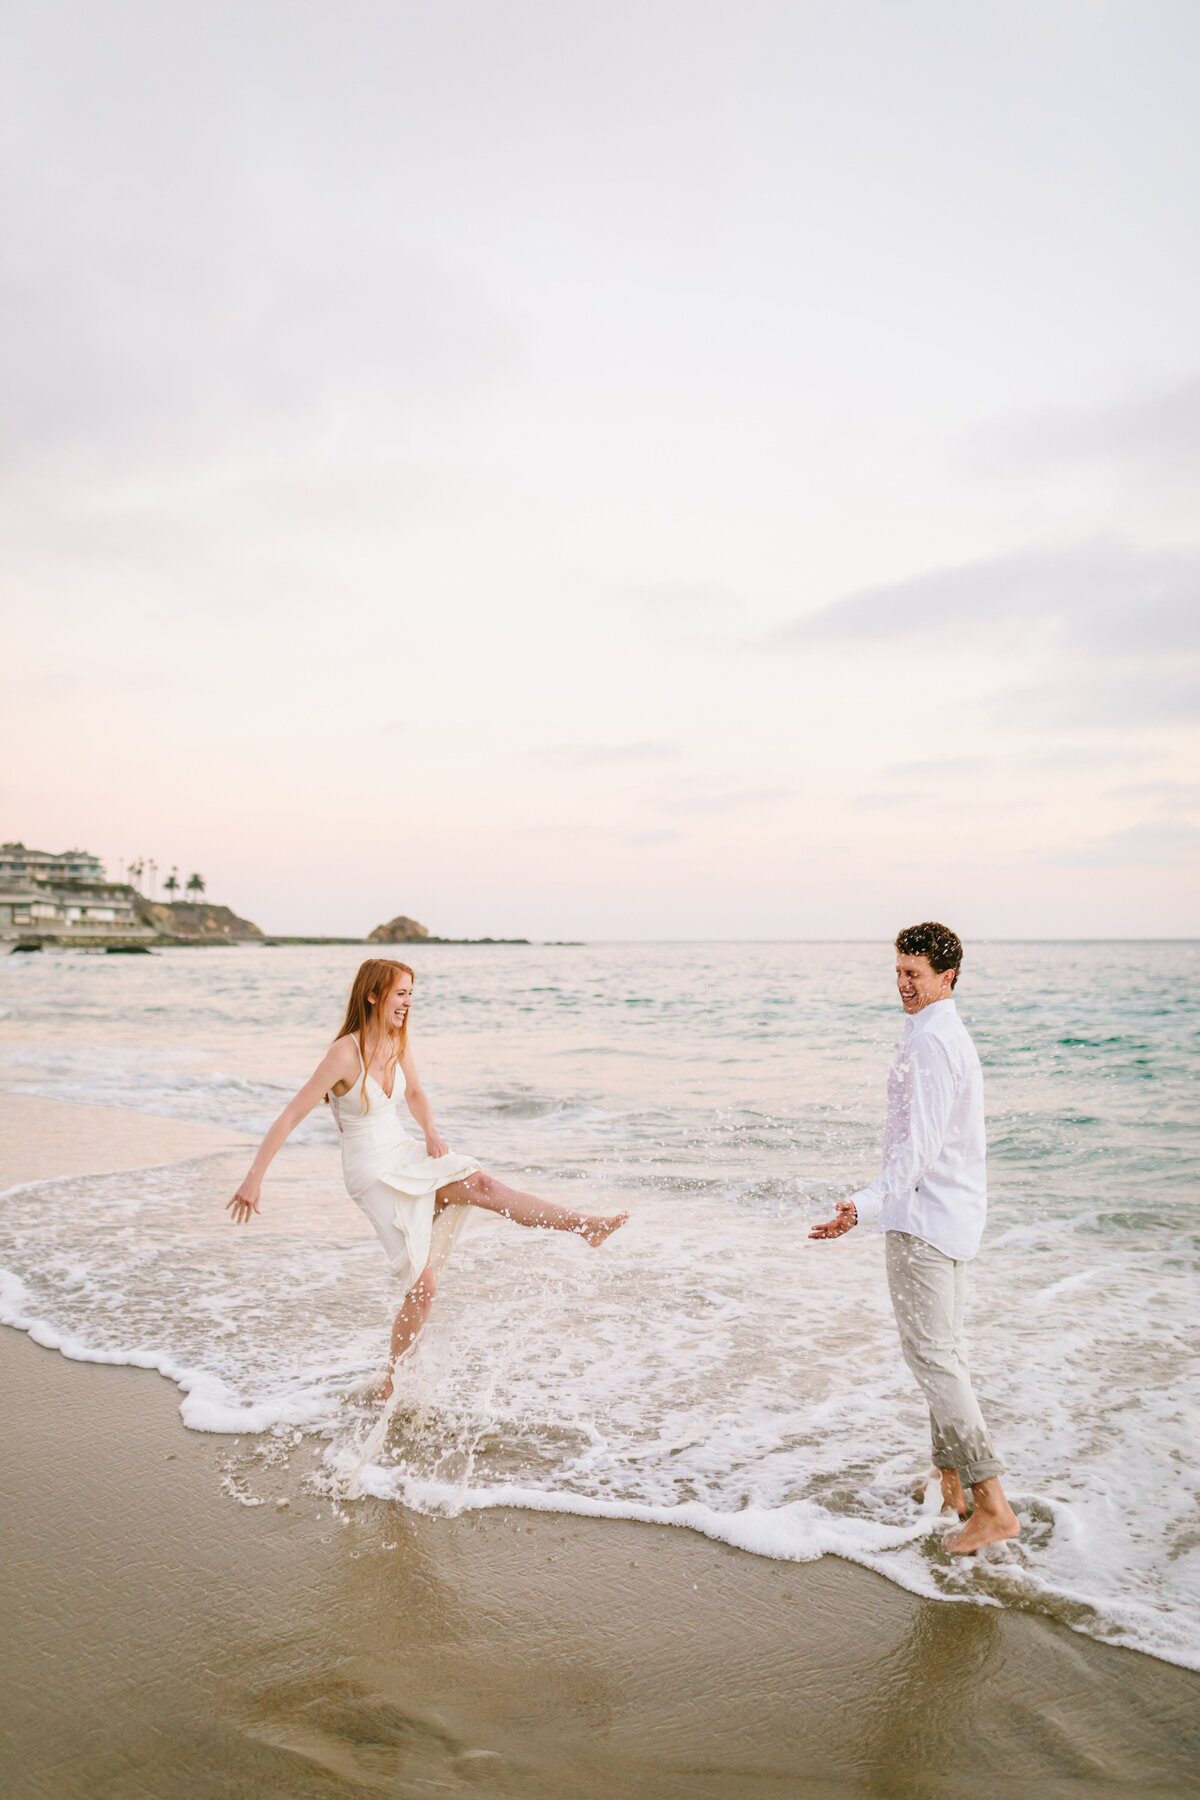 Best California and Texas Engagement Photographer-Jodee Debes Photography-129